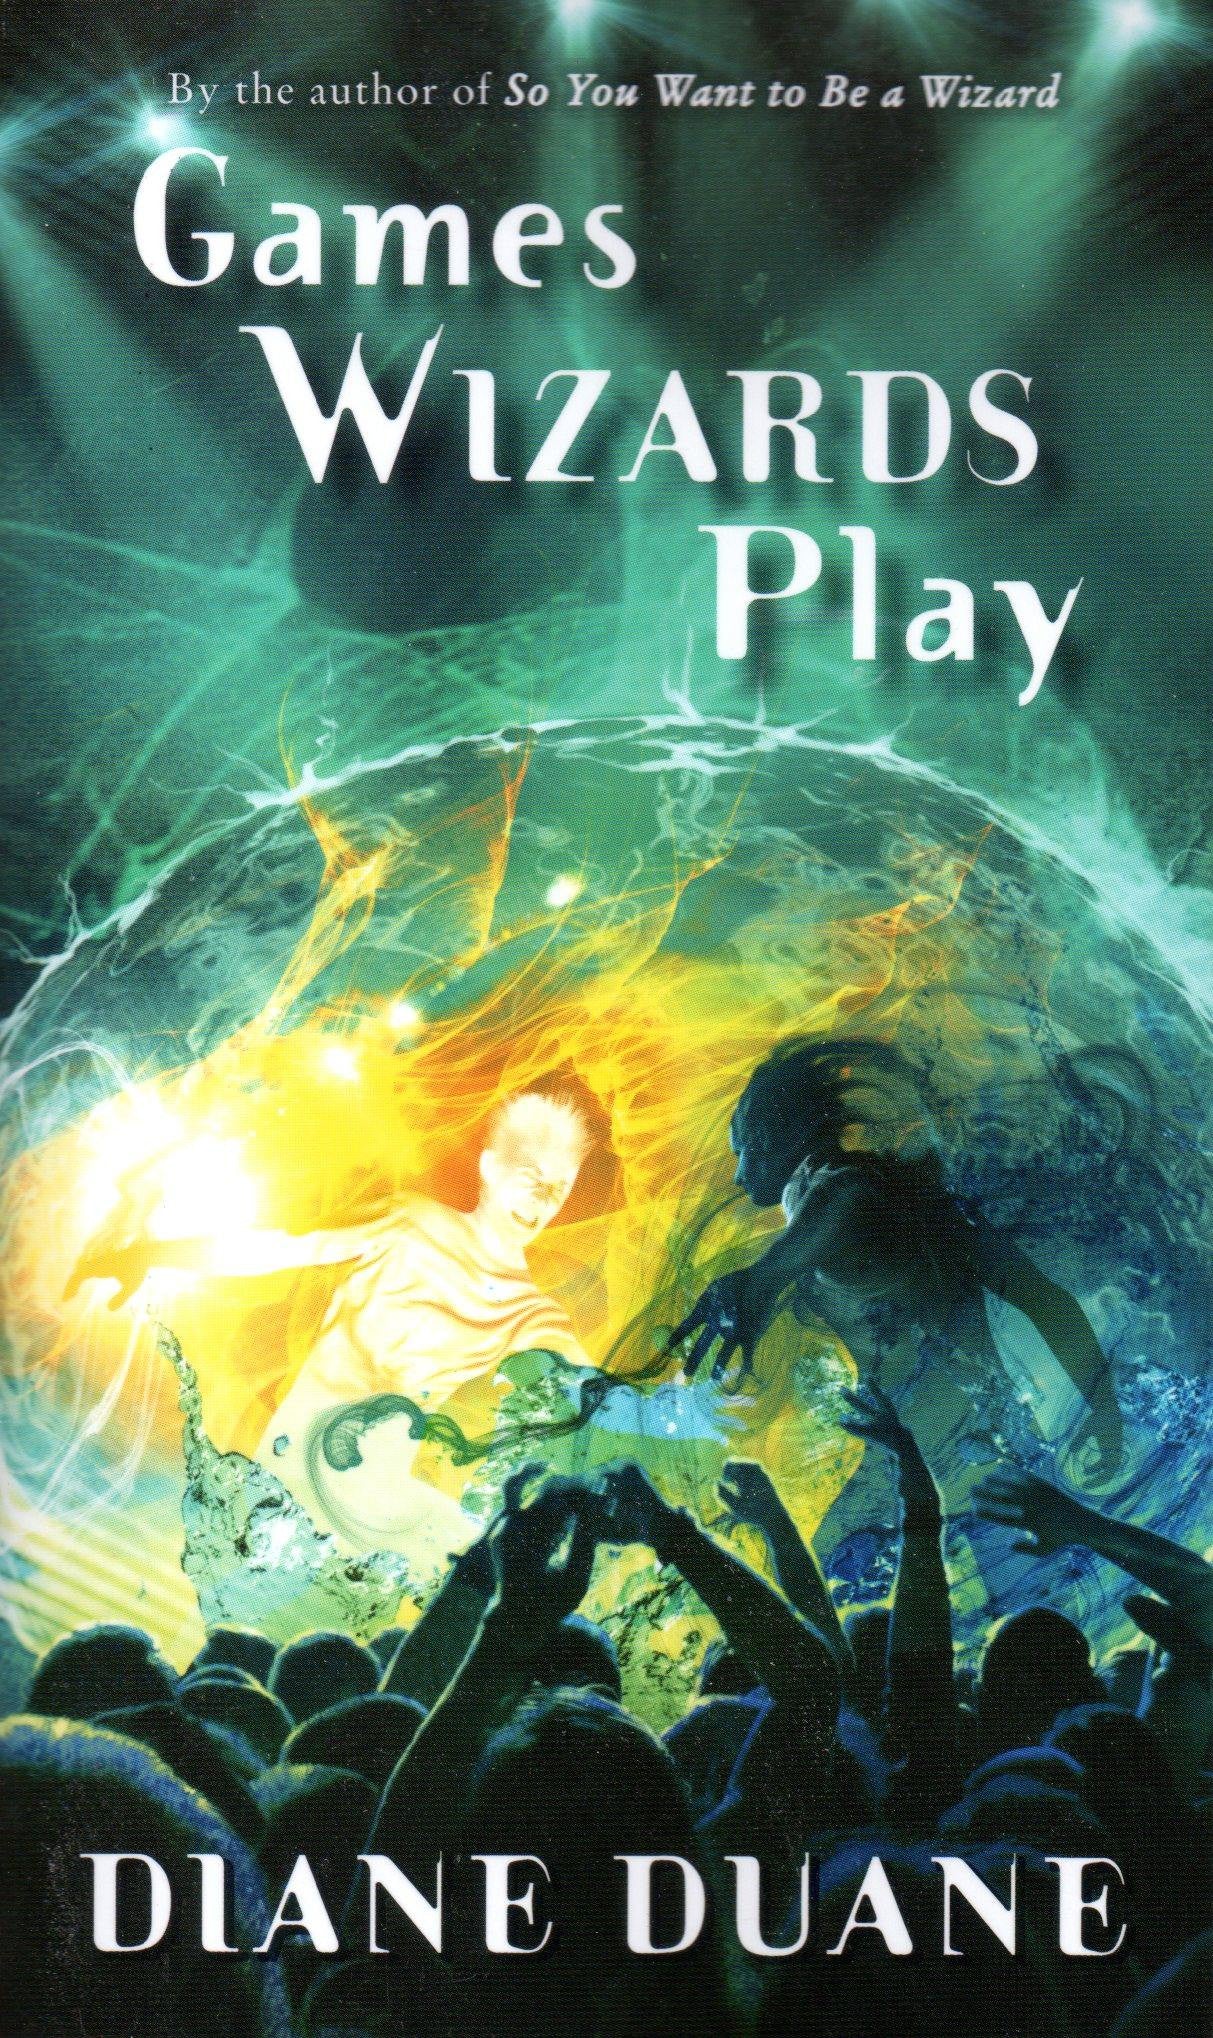 Games Wizards Play (Young Wizards #10) mass market paperback, new, signed / personalized